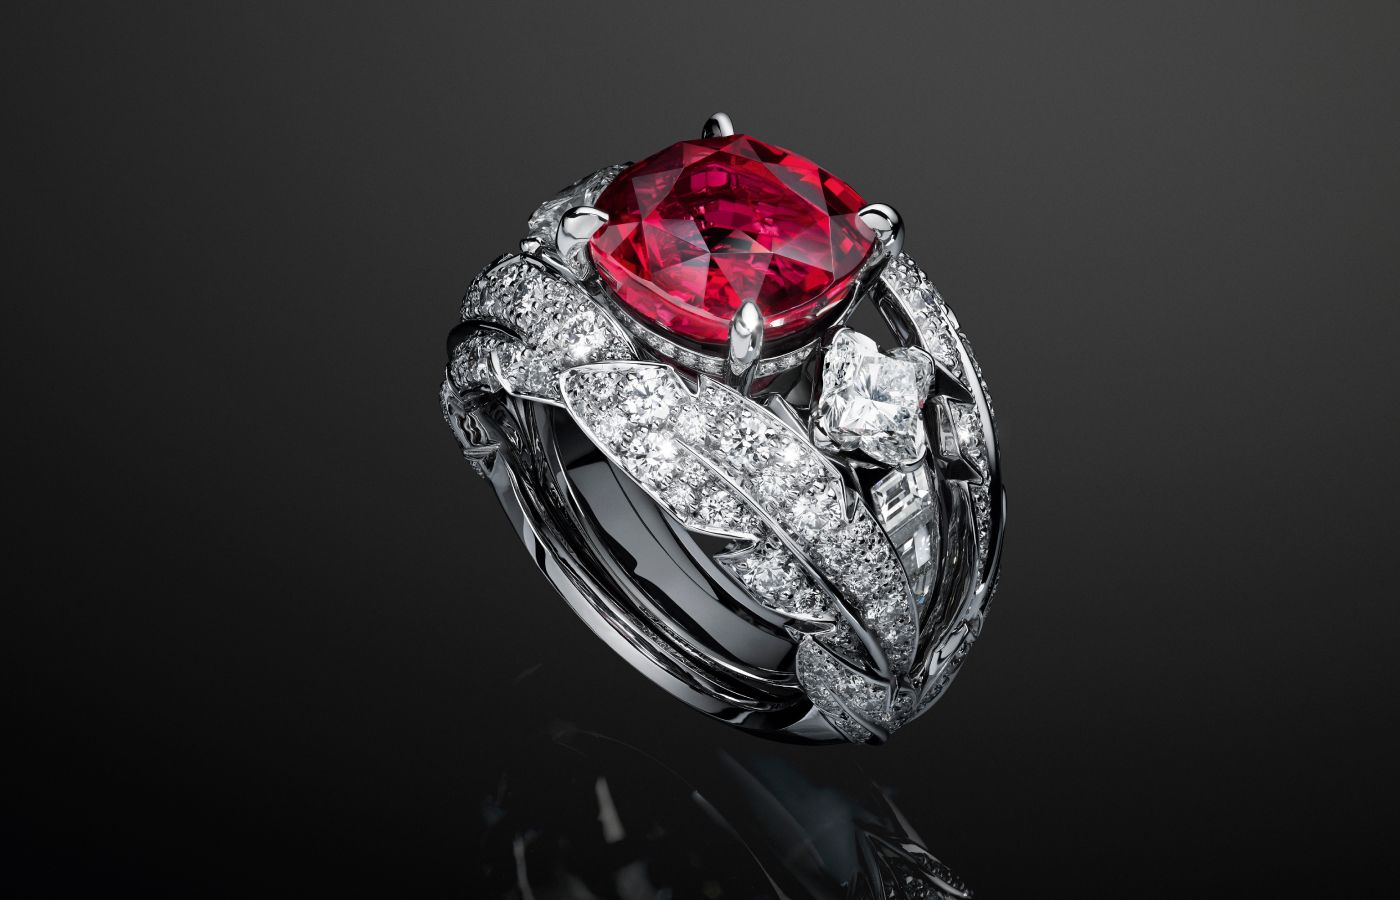 Louis Vuitton Flight High Jewellery transformable ring in white gold, platinum, Pigeon’s Blood ruby, Monogram Flower cut diamonds and diamonds from the Deep Time High Jewellery Collection